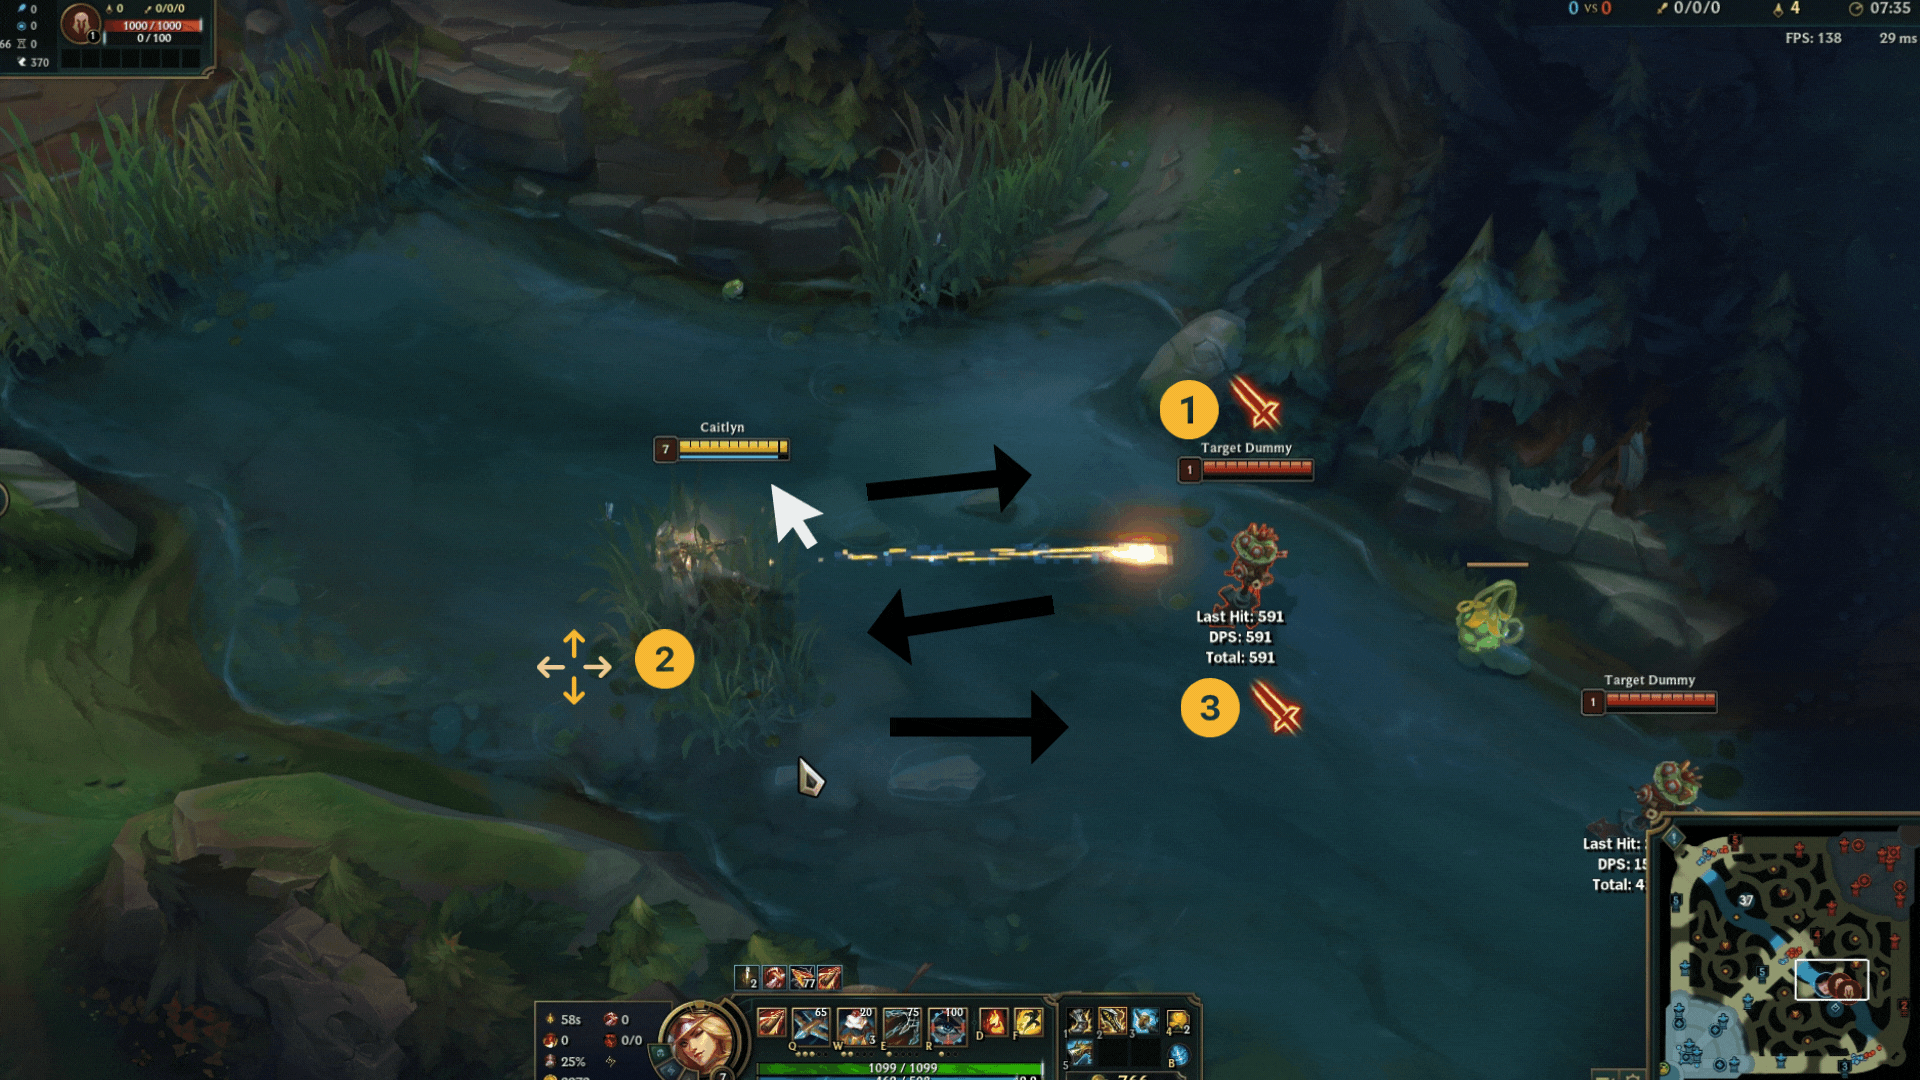 How to Kite in League of Legends: 4 Steps (with Pictures)